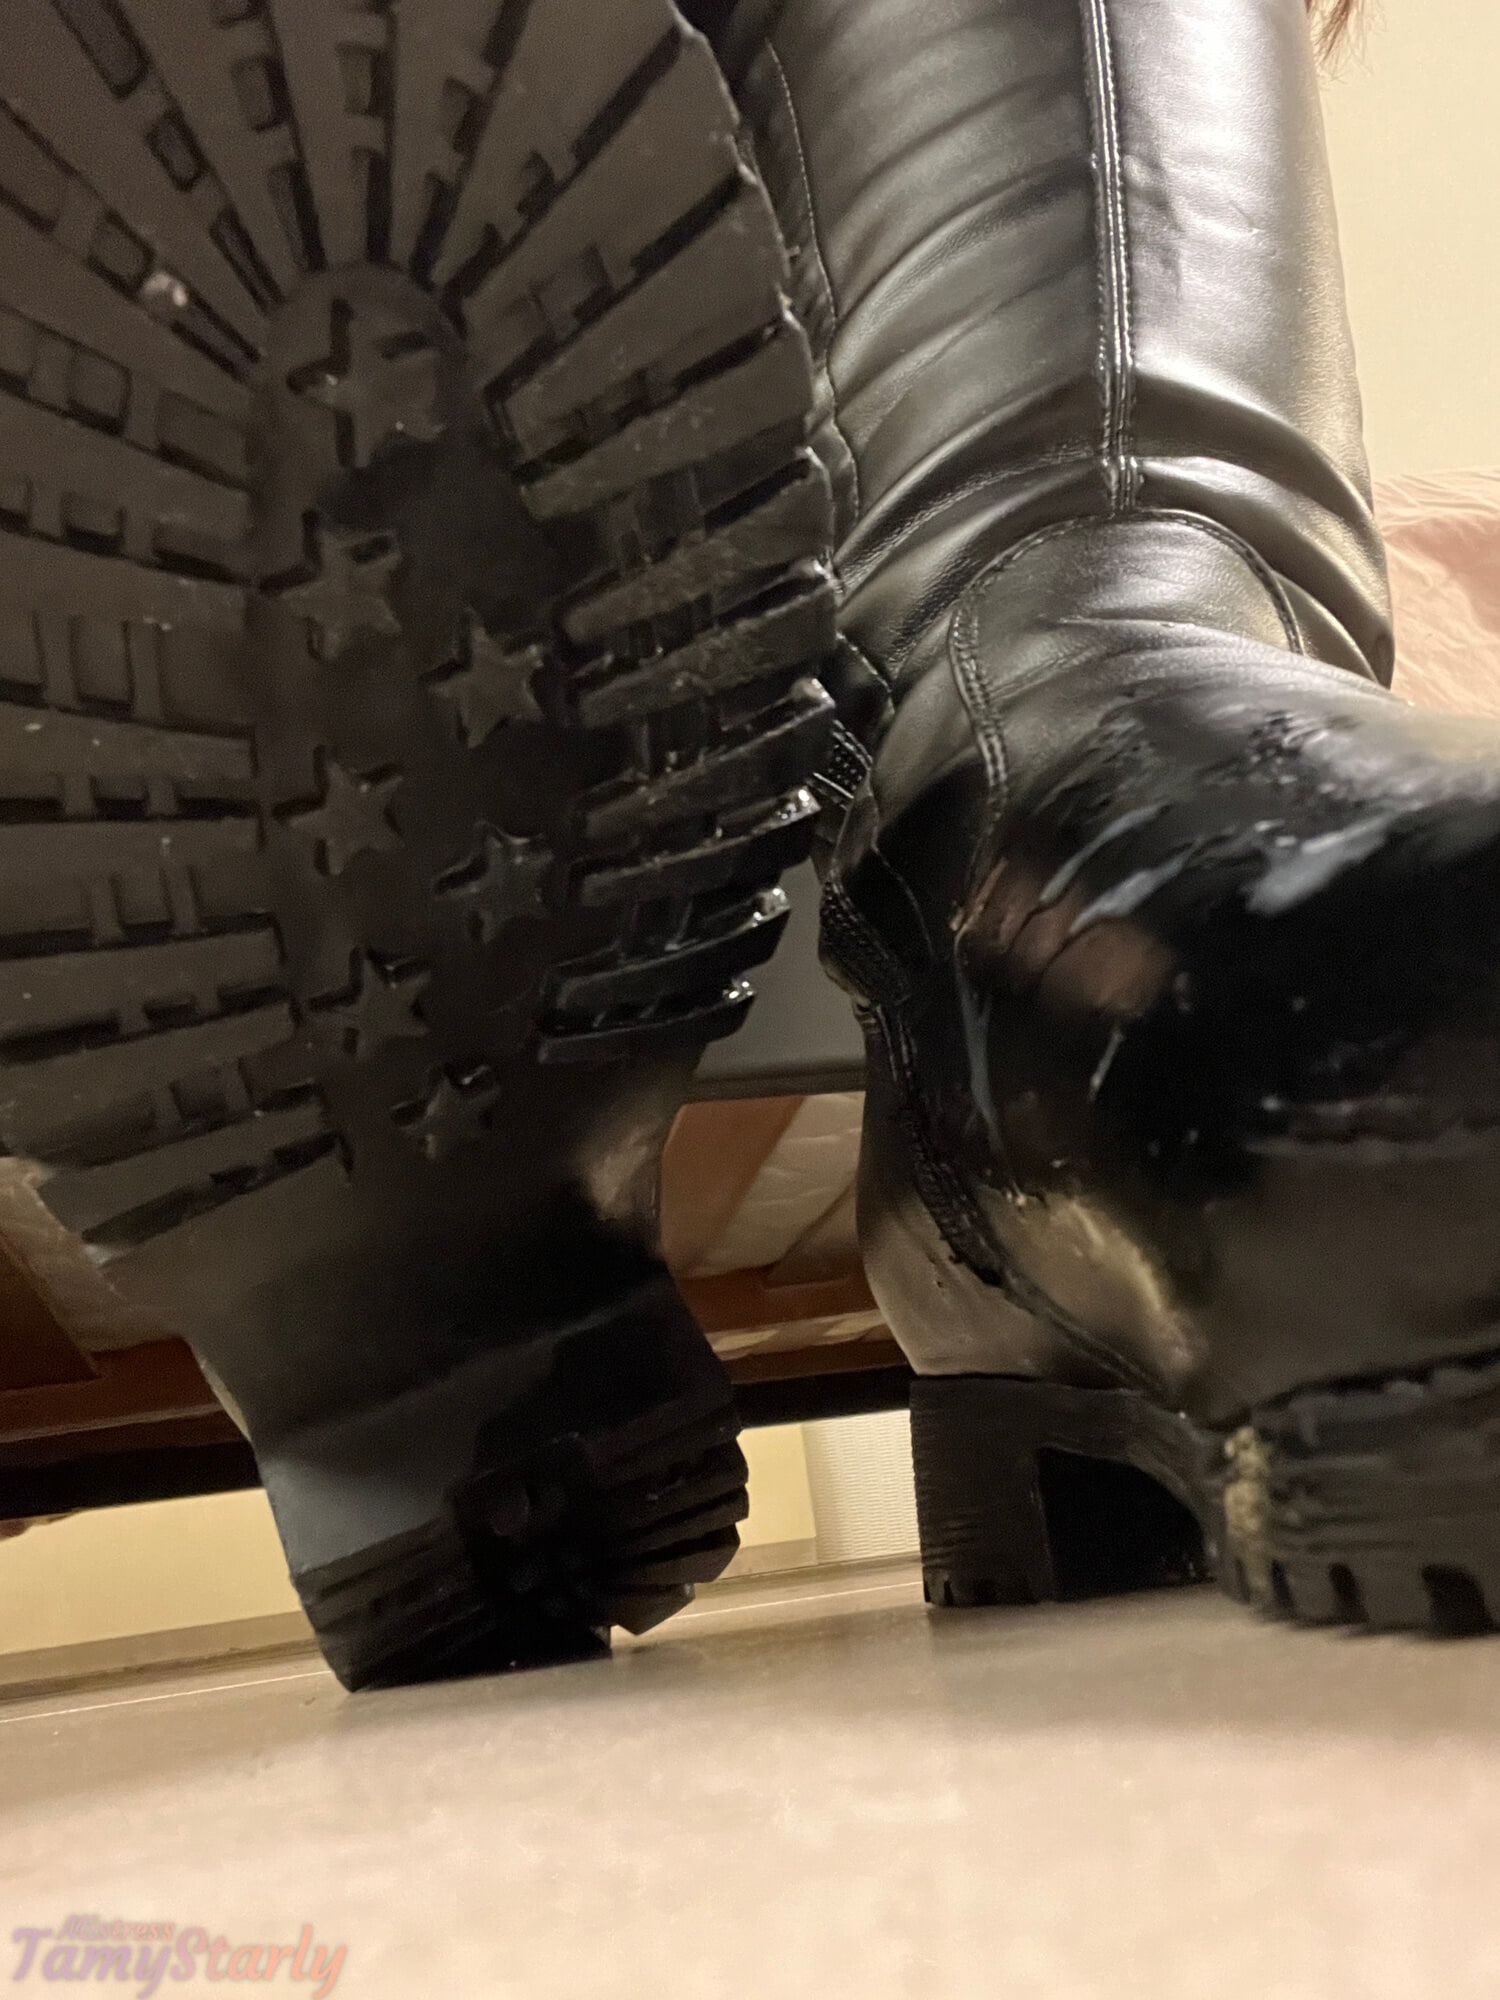 March & Blast in Super Thigh Boots - Ball Stomp, Bootjob #3